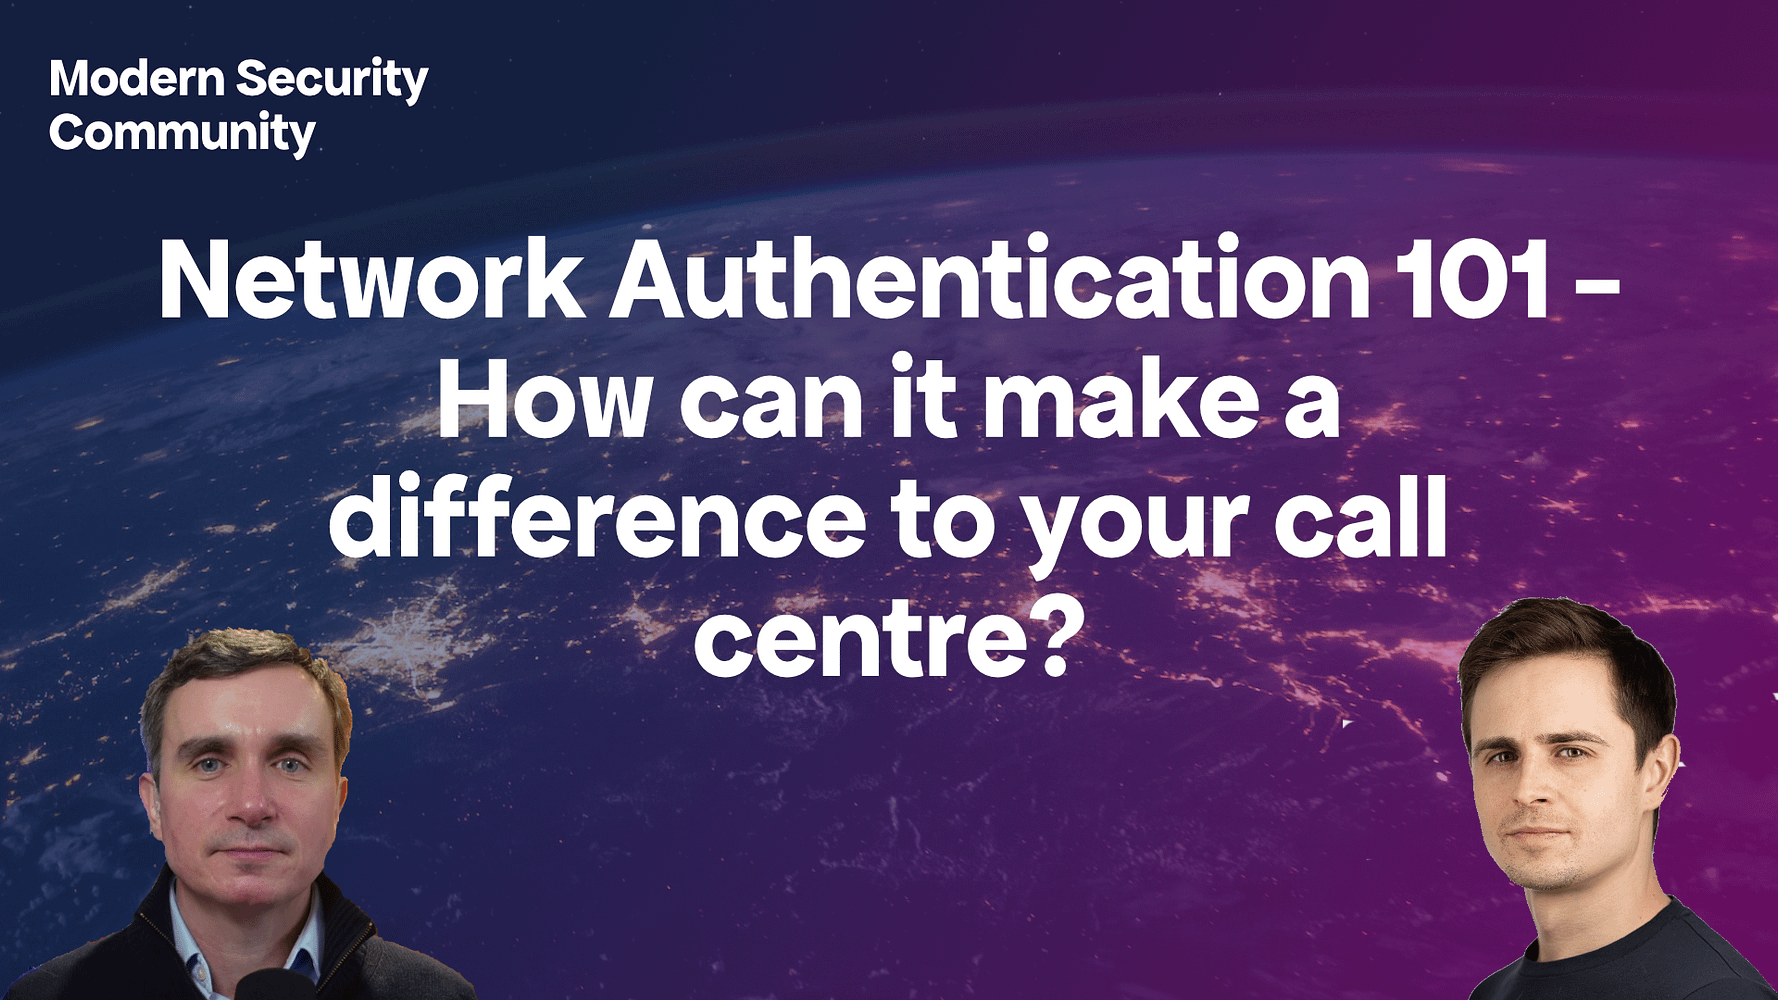 Featured image for “Network Authentication and Fraud Prevention 101 – How can it make a difference to your call centre?”